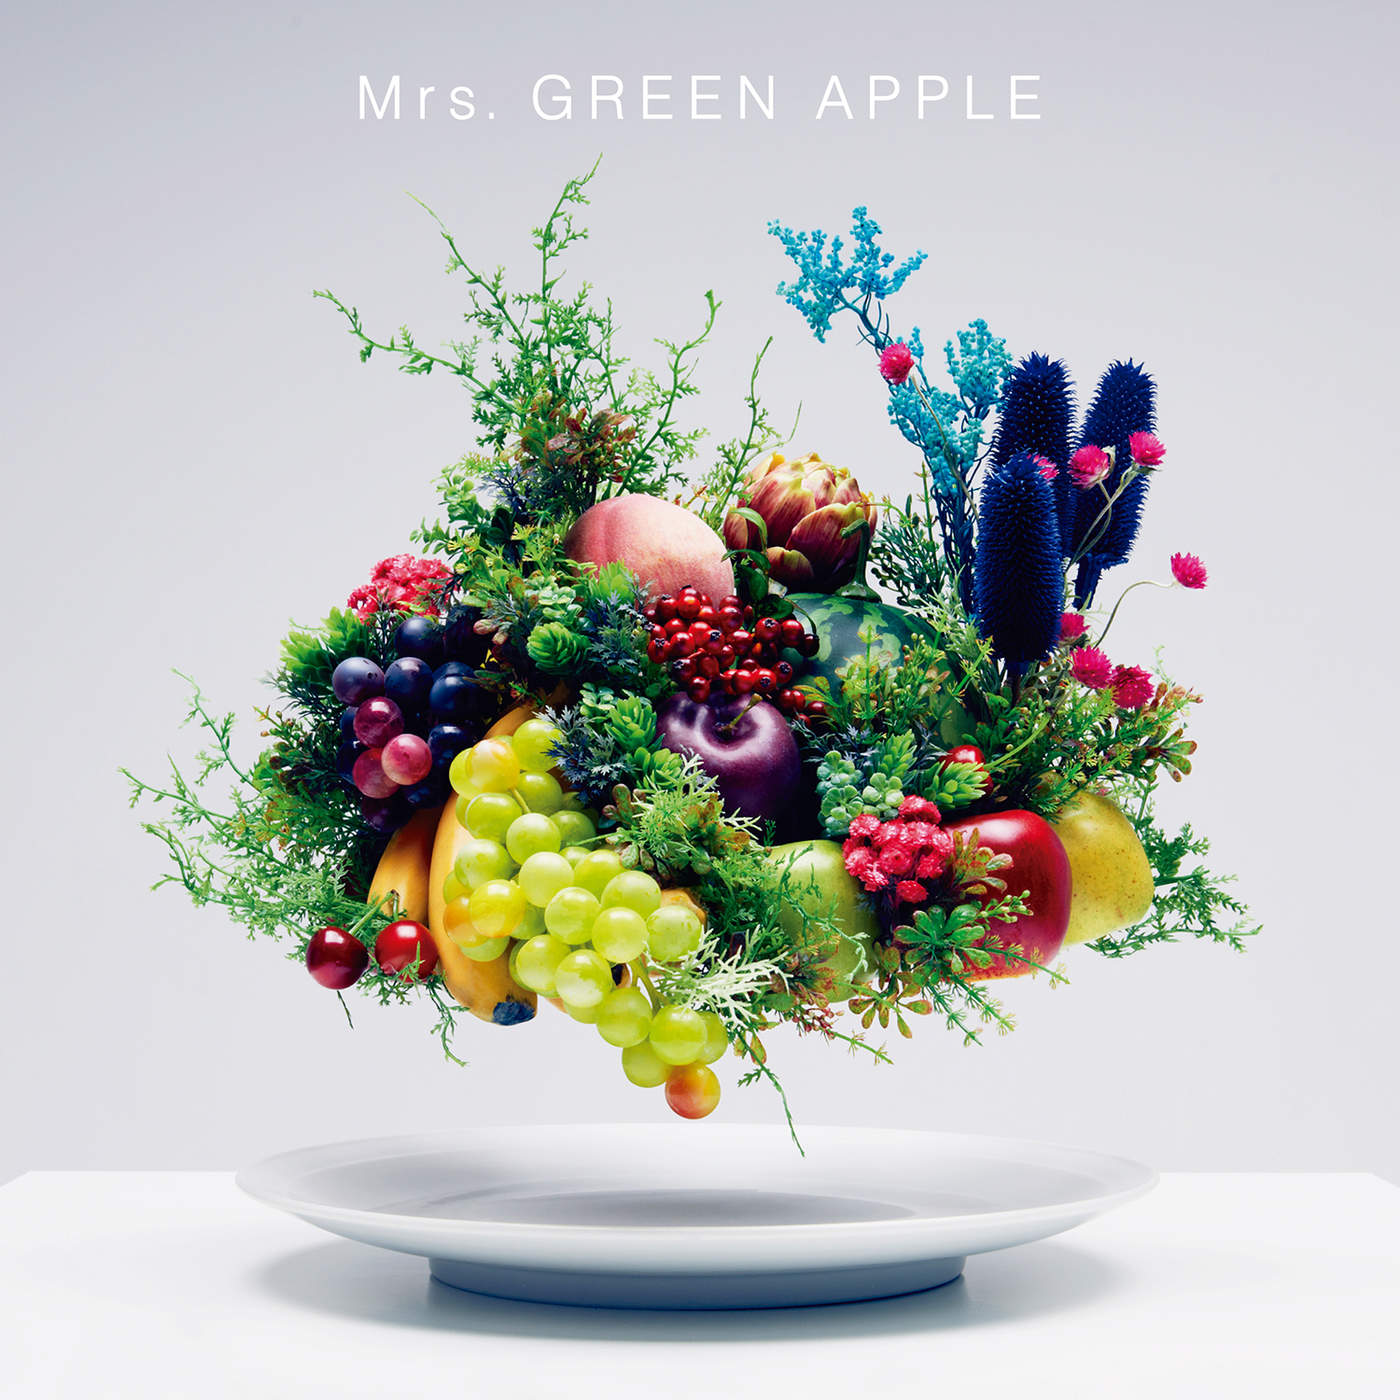 [EP] Mrs. Green Apple - Variety (iTunes Plus AAC M4A)